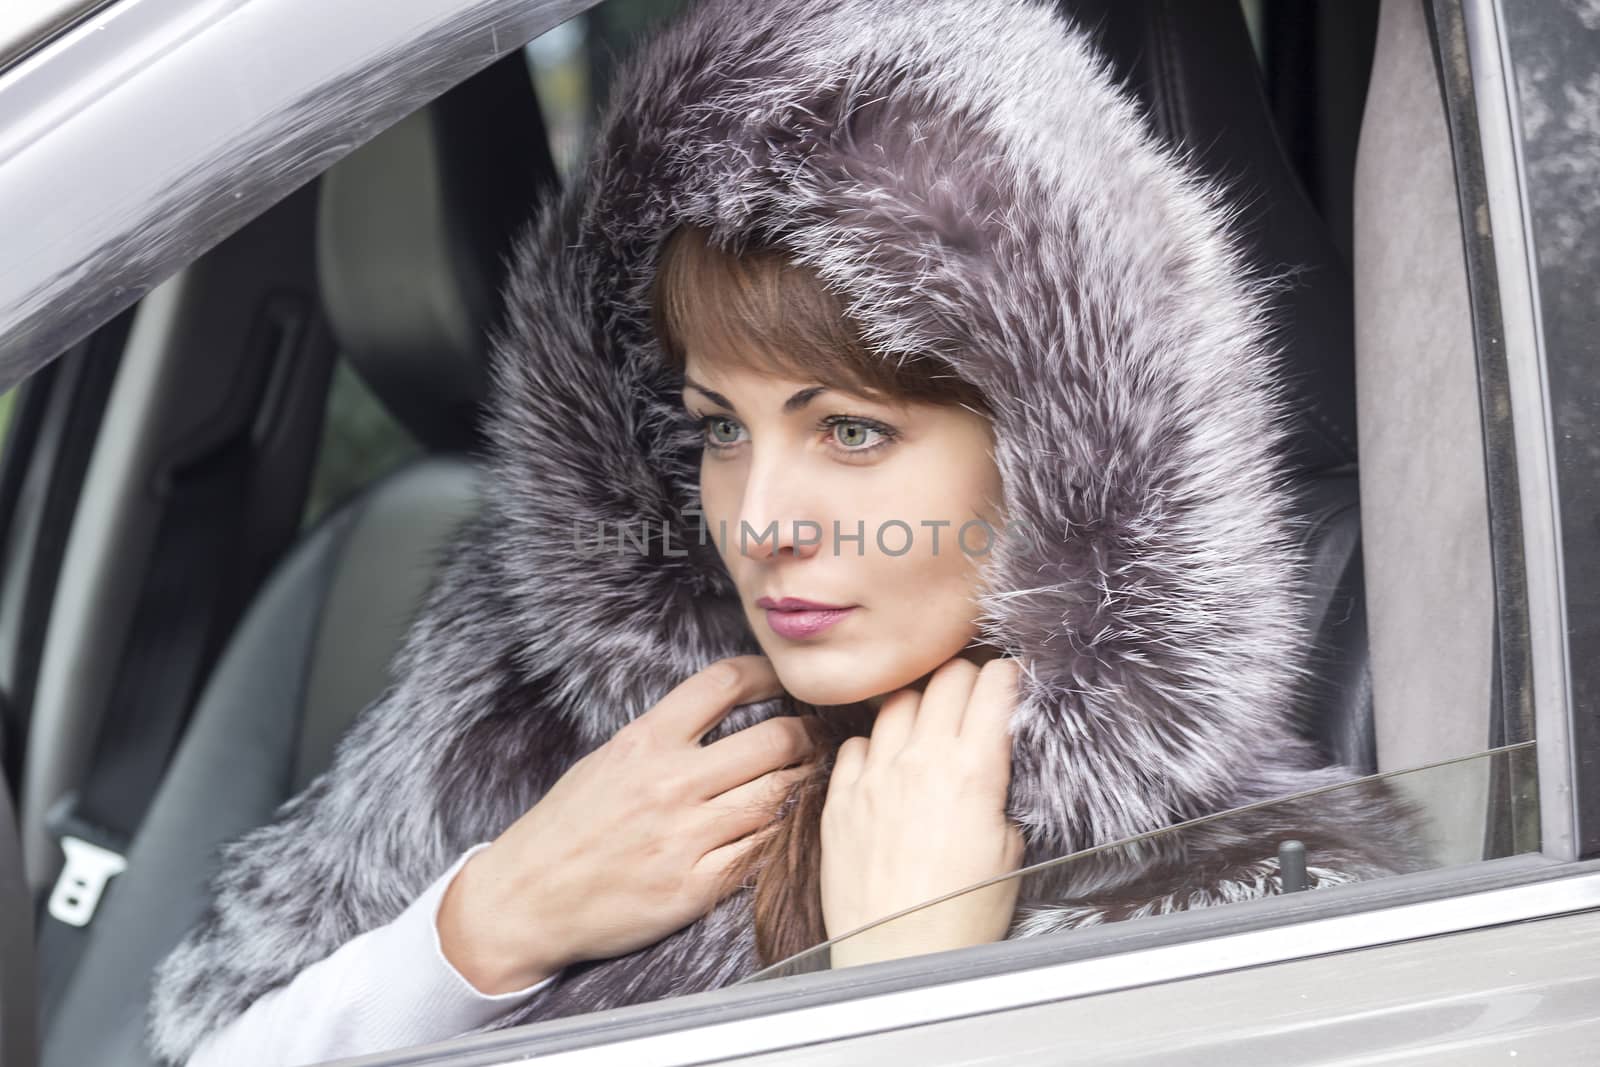 The expressive face of a young pretty girl in the window of the car